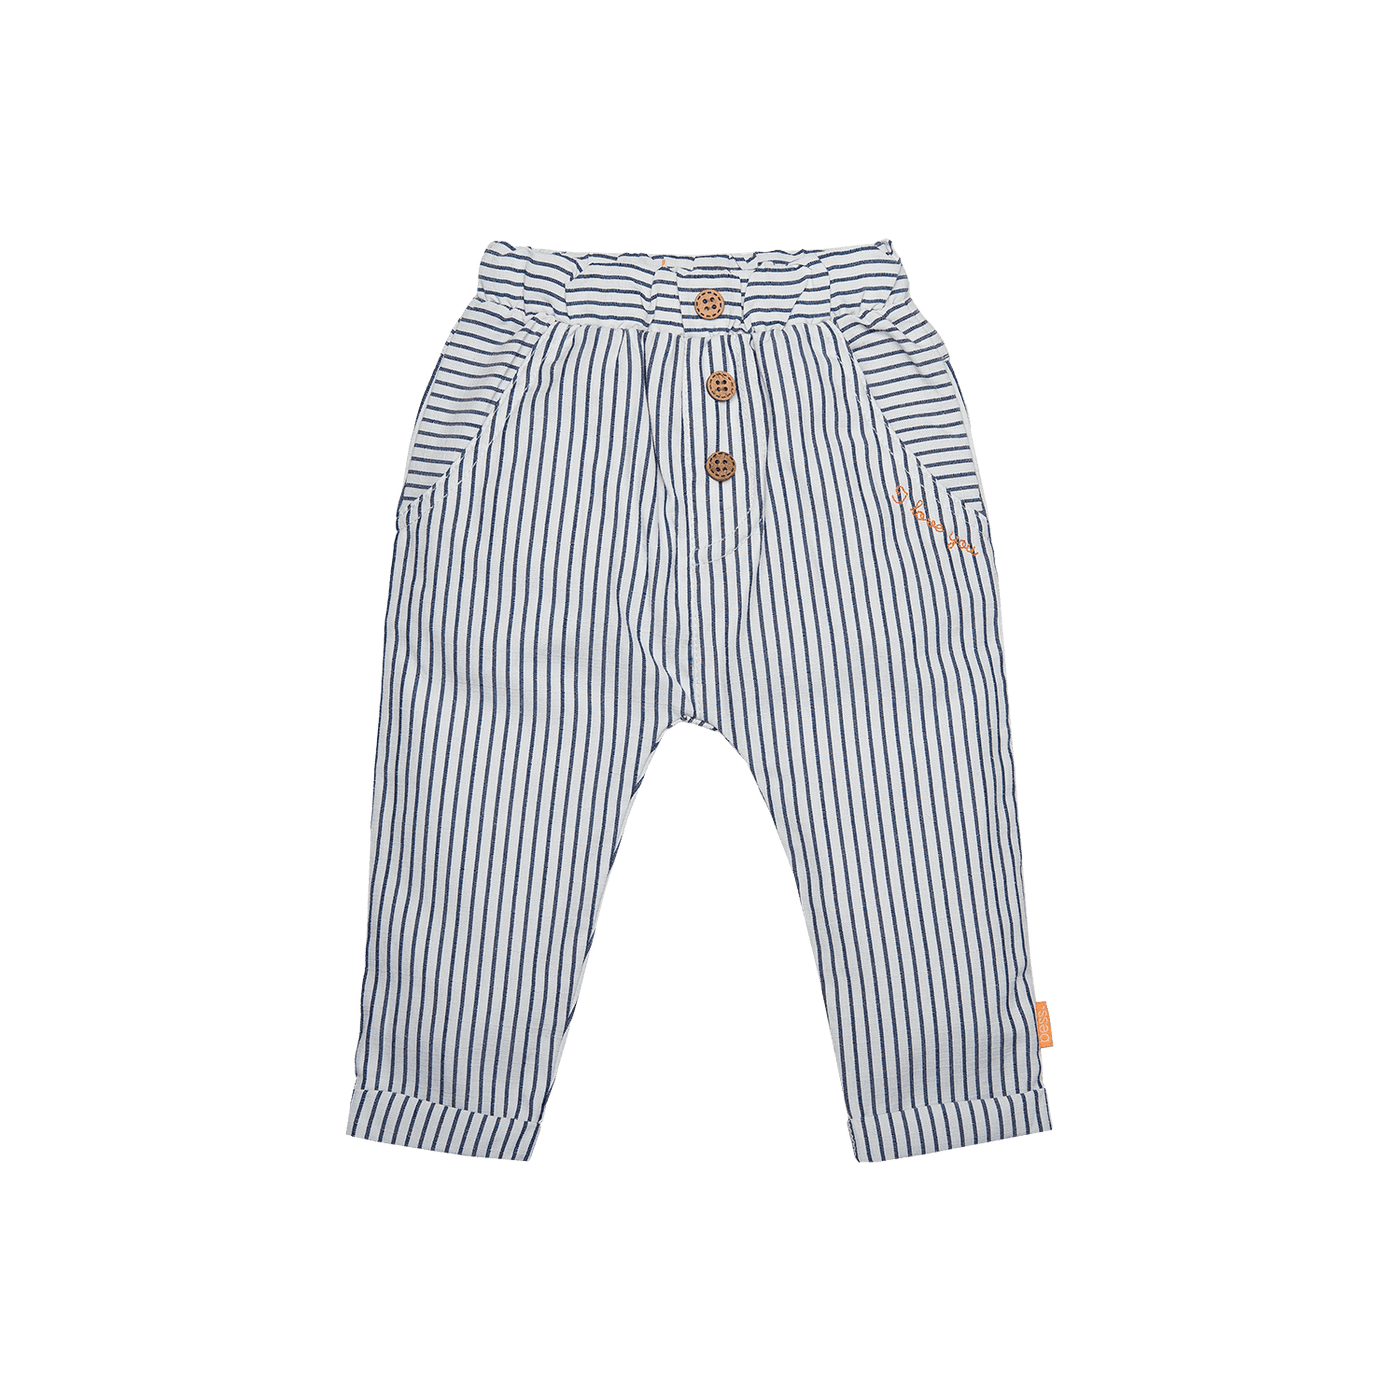 Bess S23 Pants Woven Striped Off White 231110-034